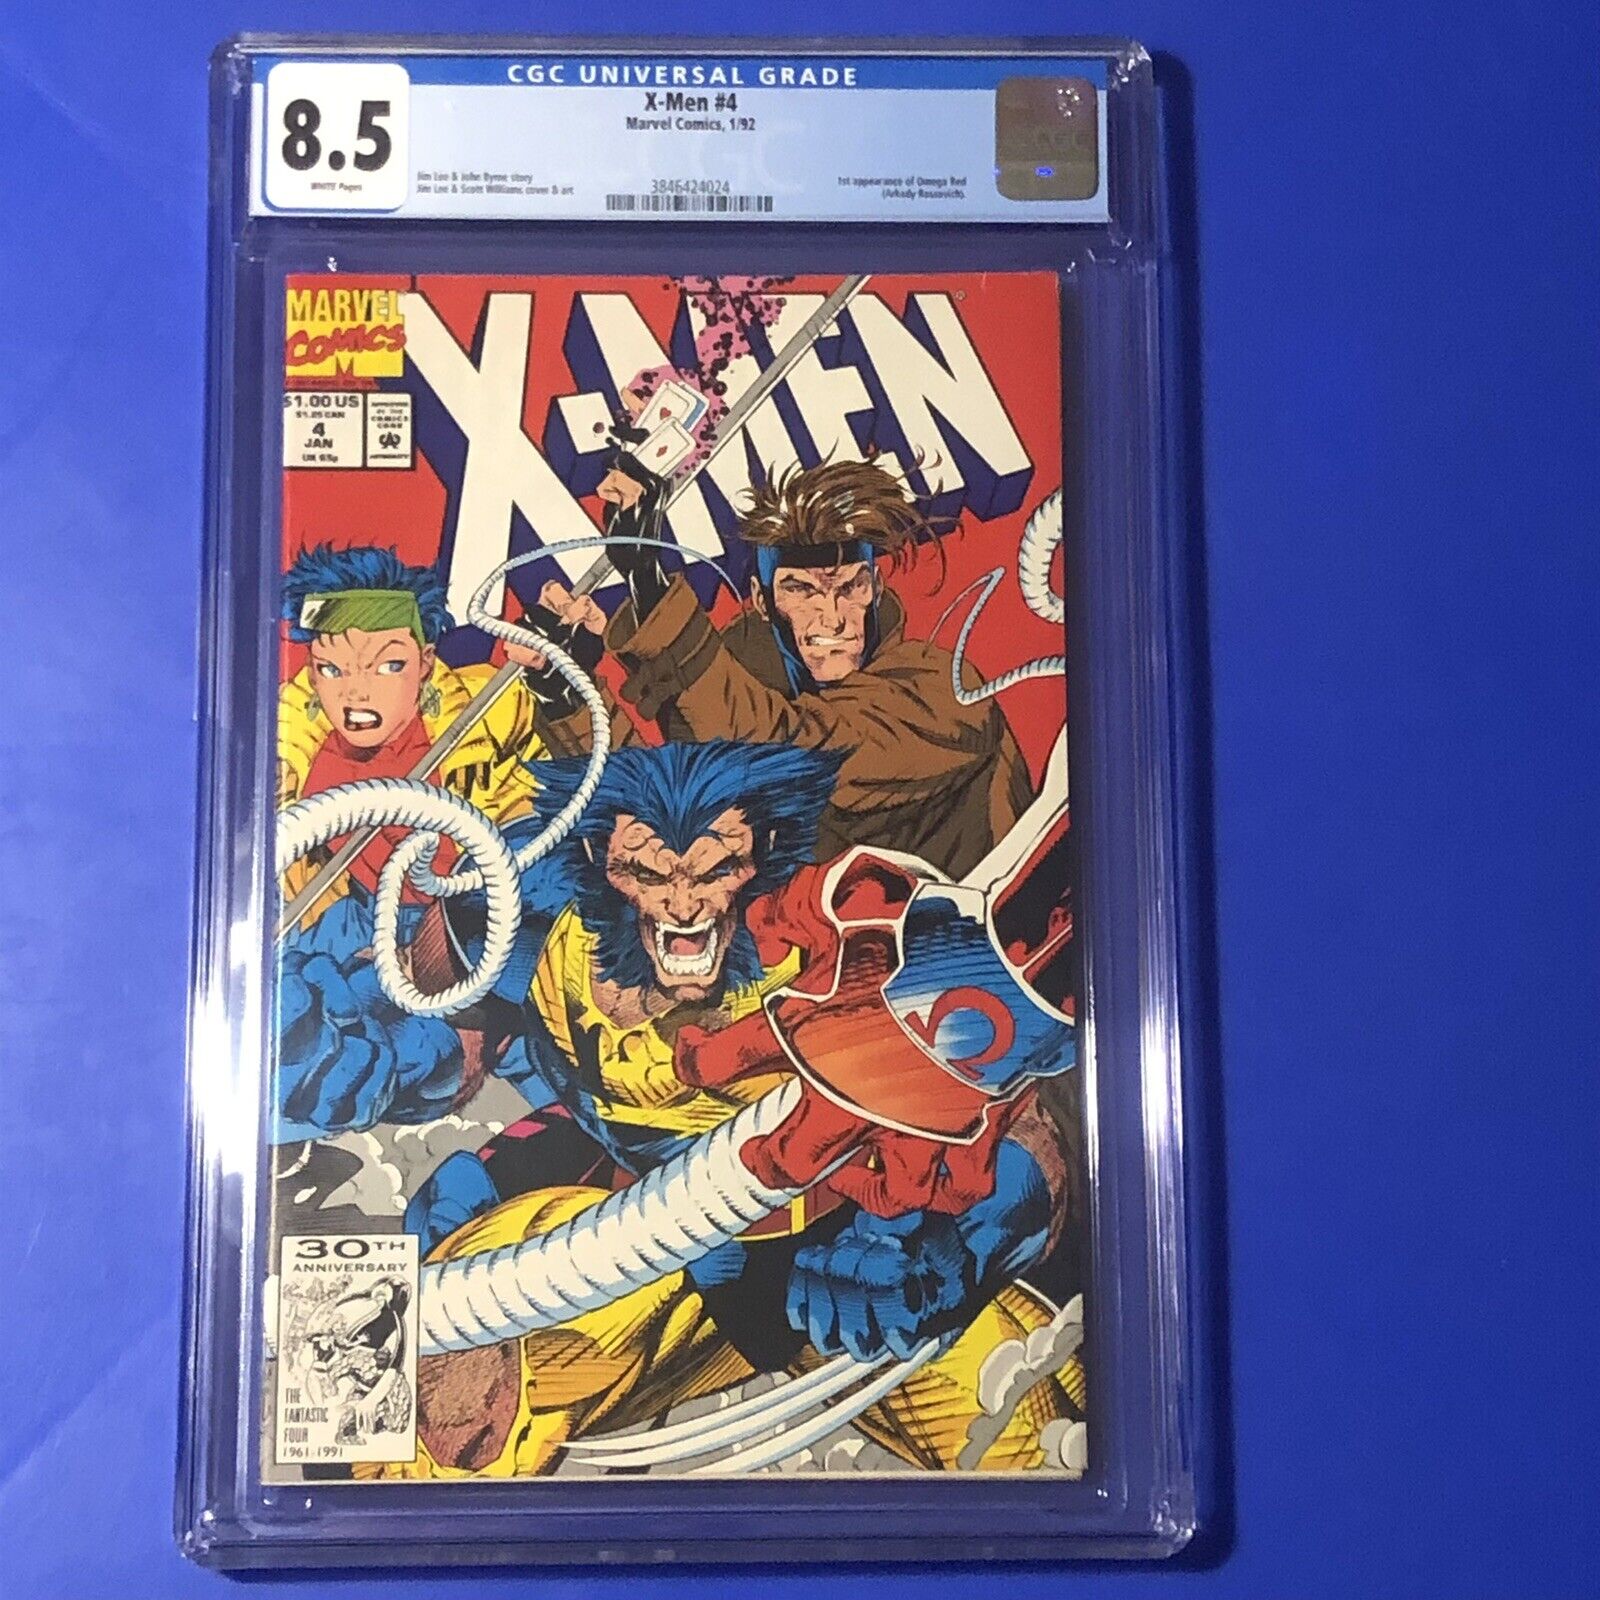 X-MEN #4 CGC 8.5 WHITE PAGES 1st APPEARANCE OMEGA RED JIM LEE Marvel Comics 1992